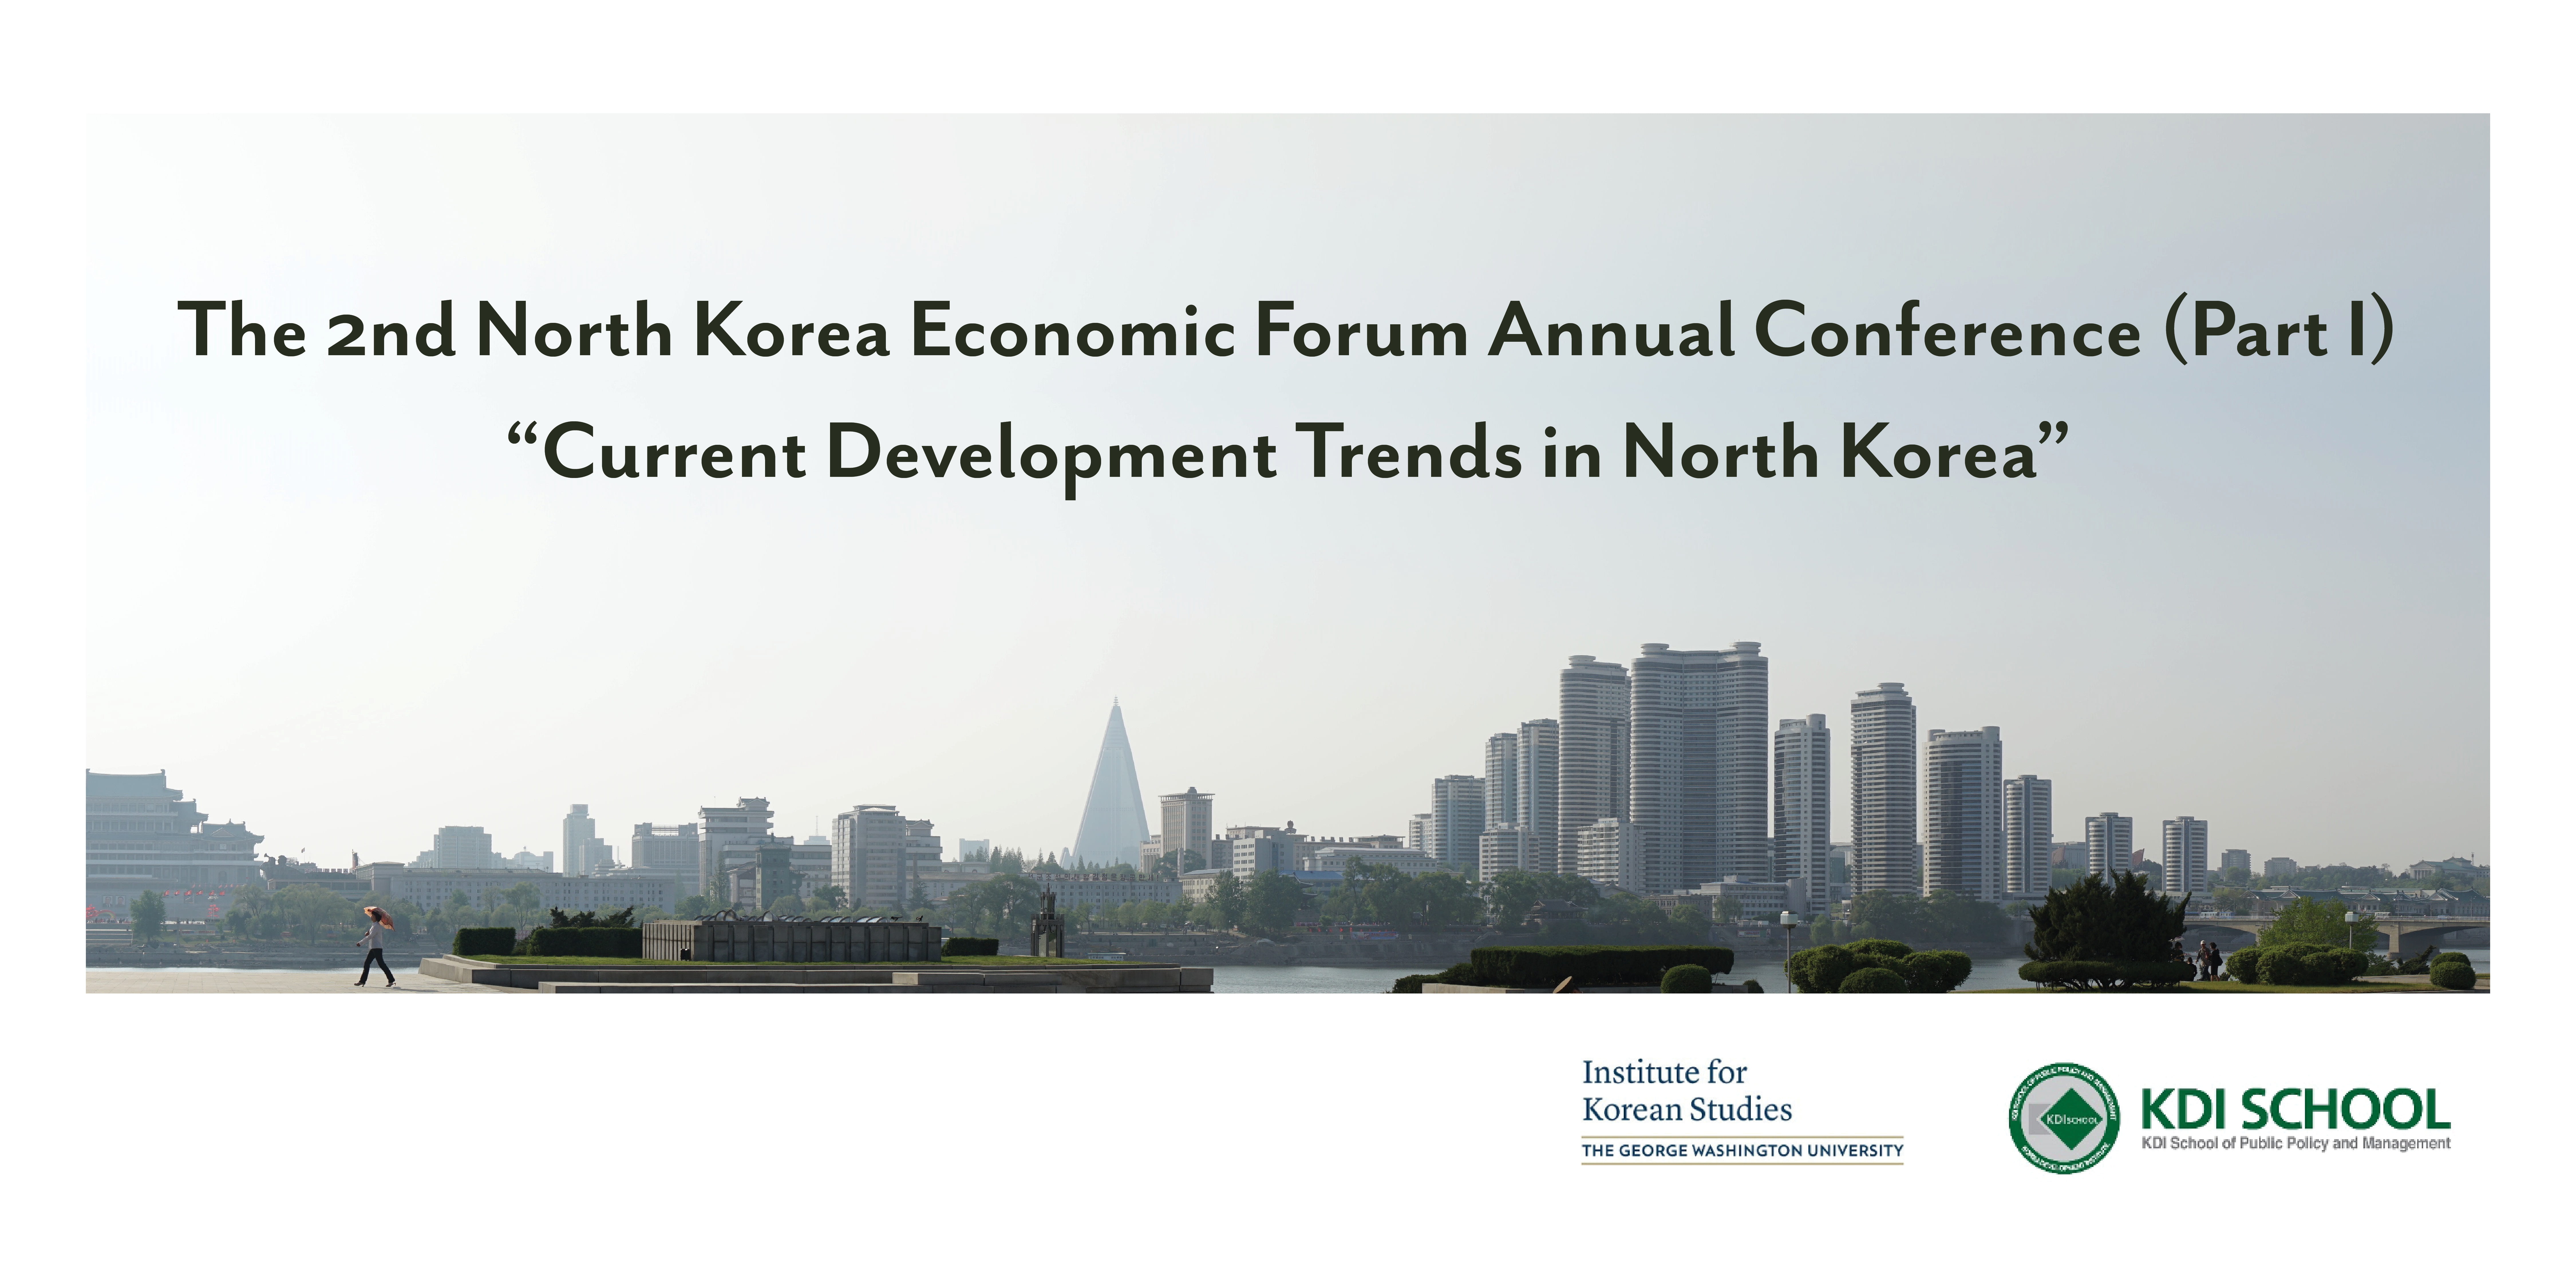 event banner for the The 2nd North Korea Economic Forum Annual Conference (Part 1)